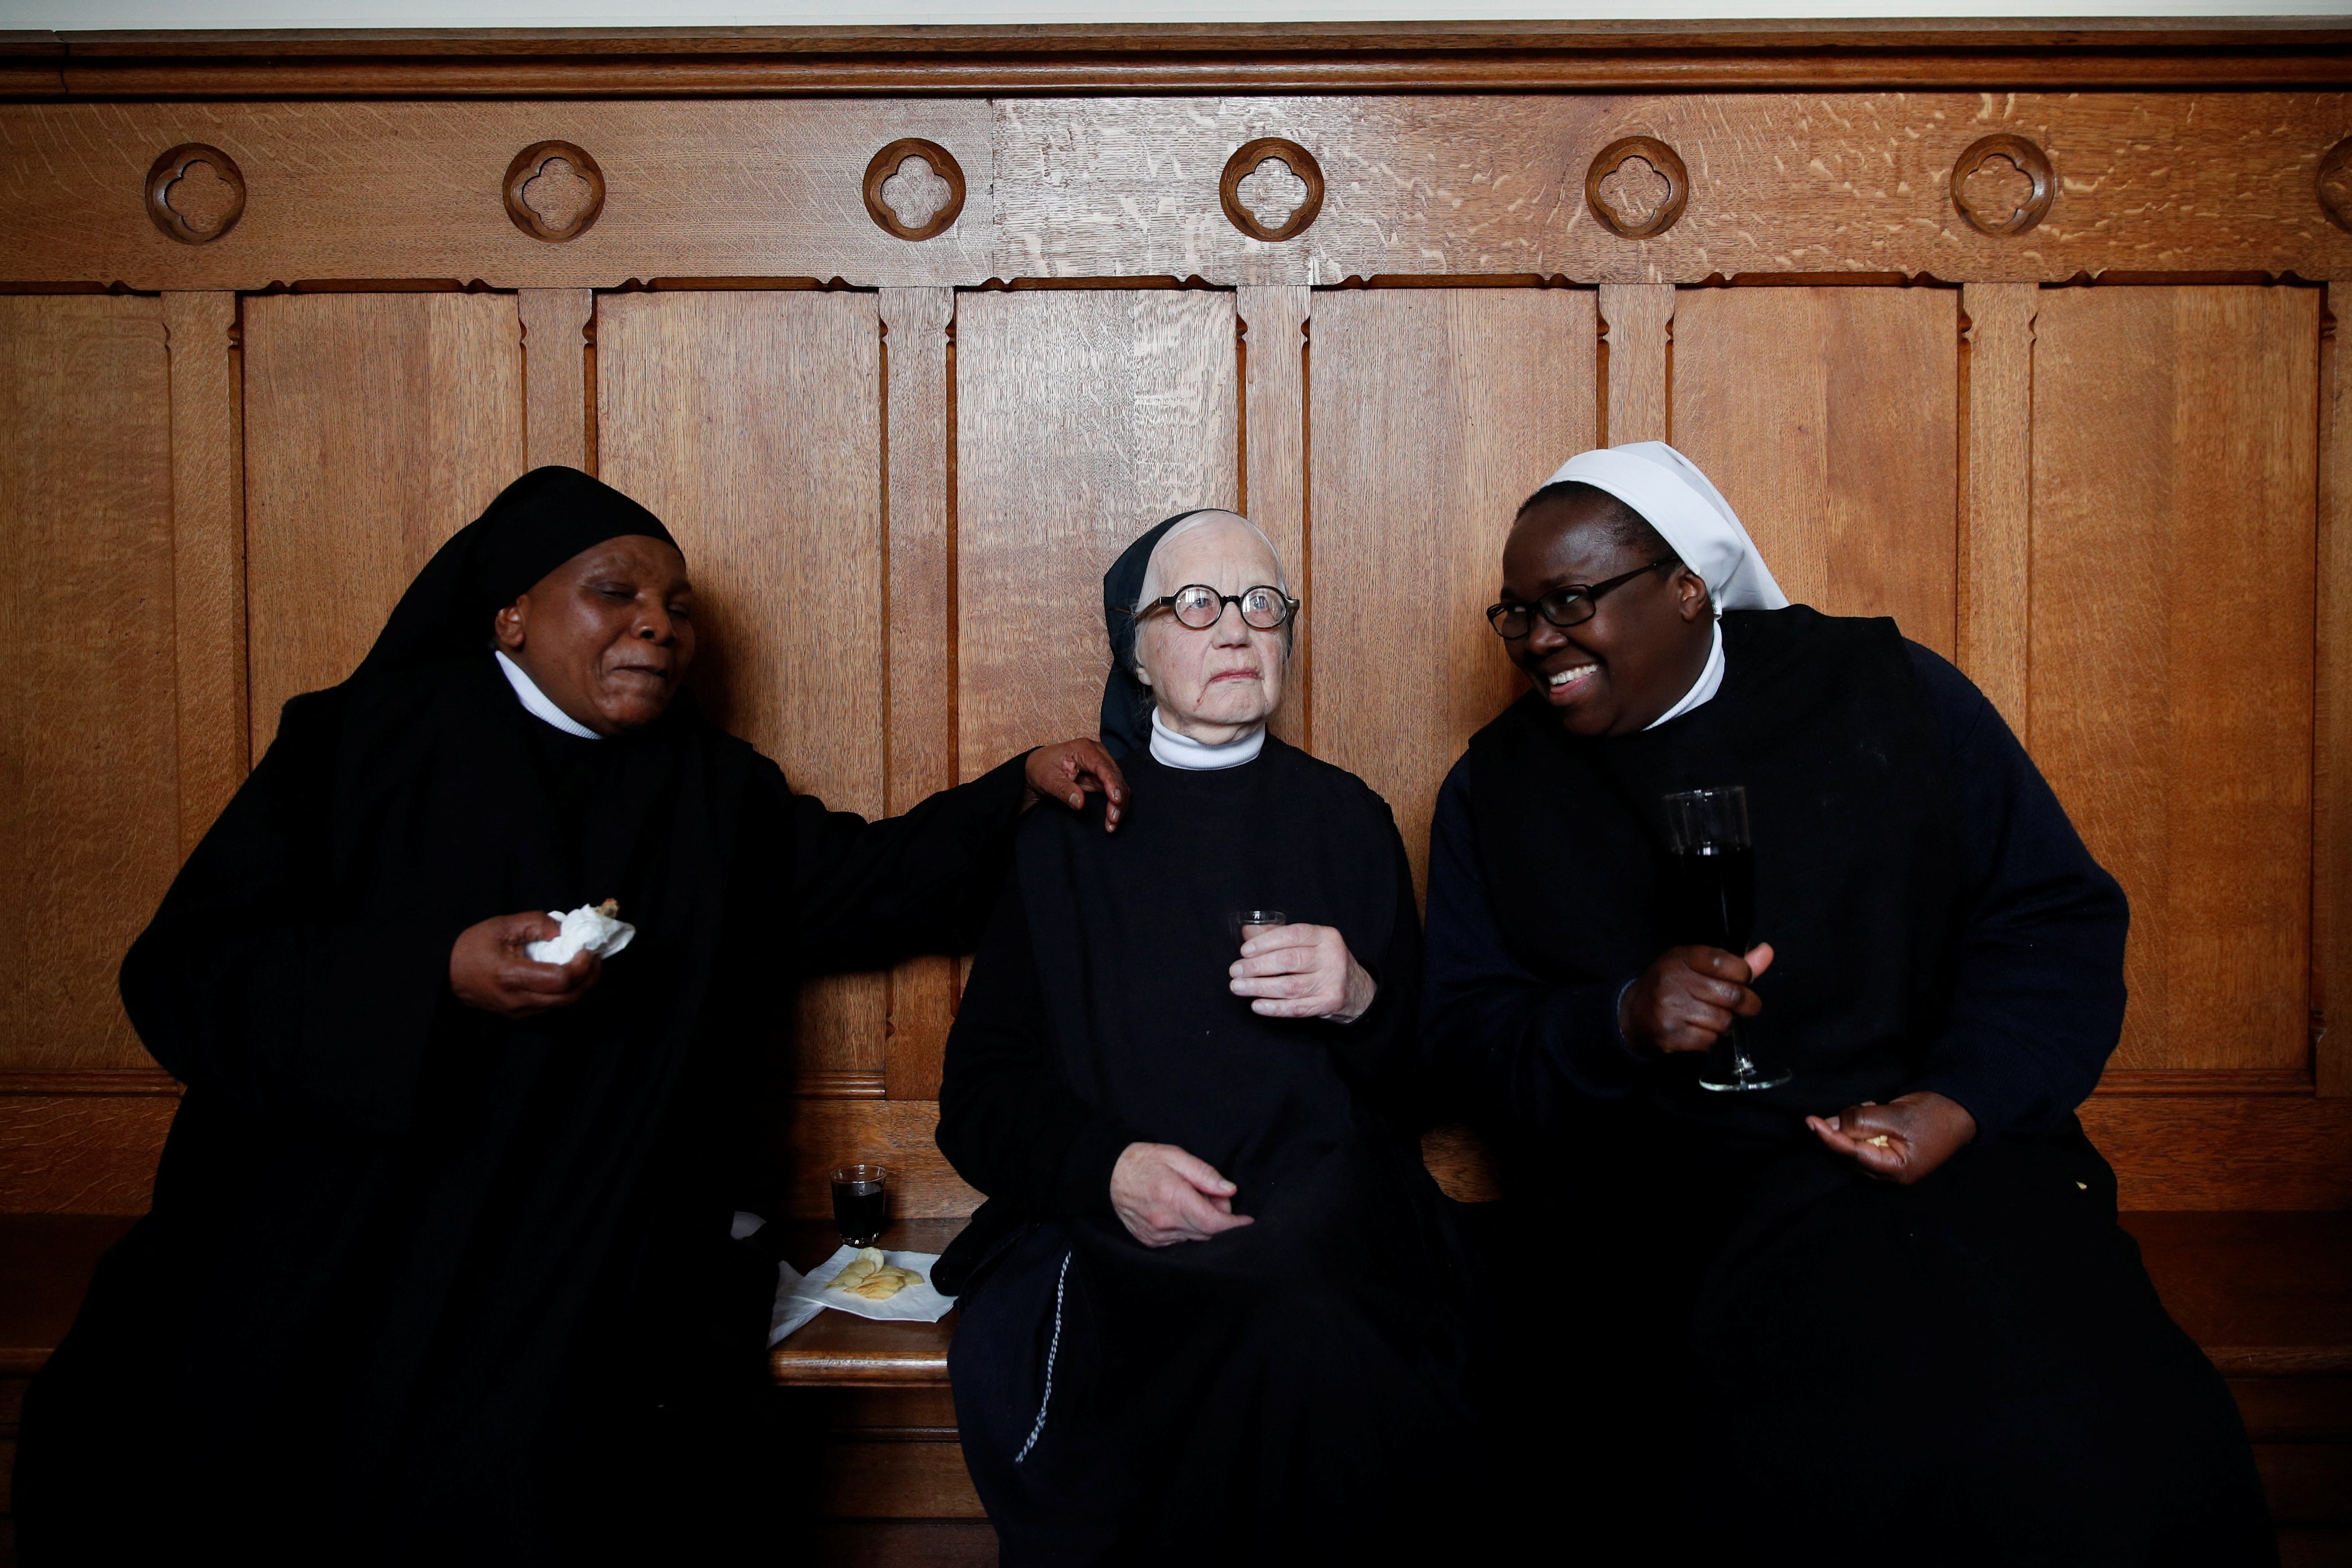 Benedictine Sisters at lunch in Anhee, Belgium